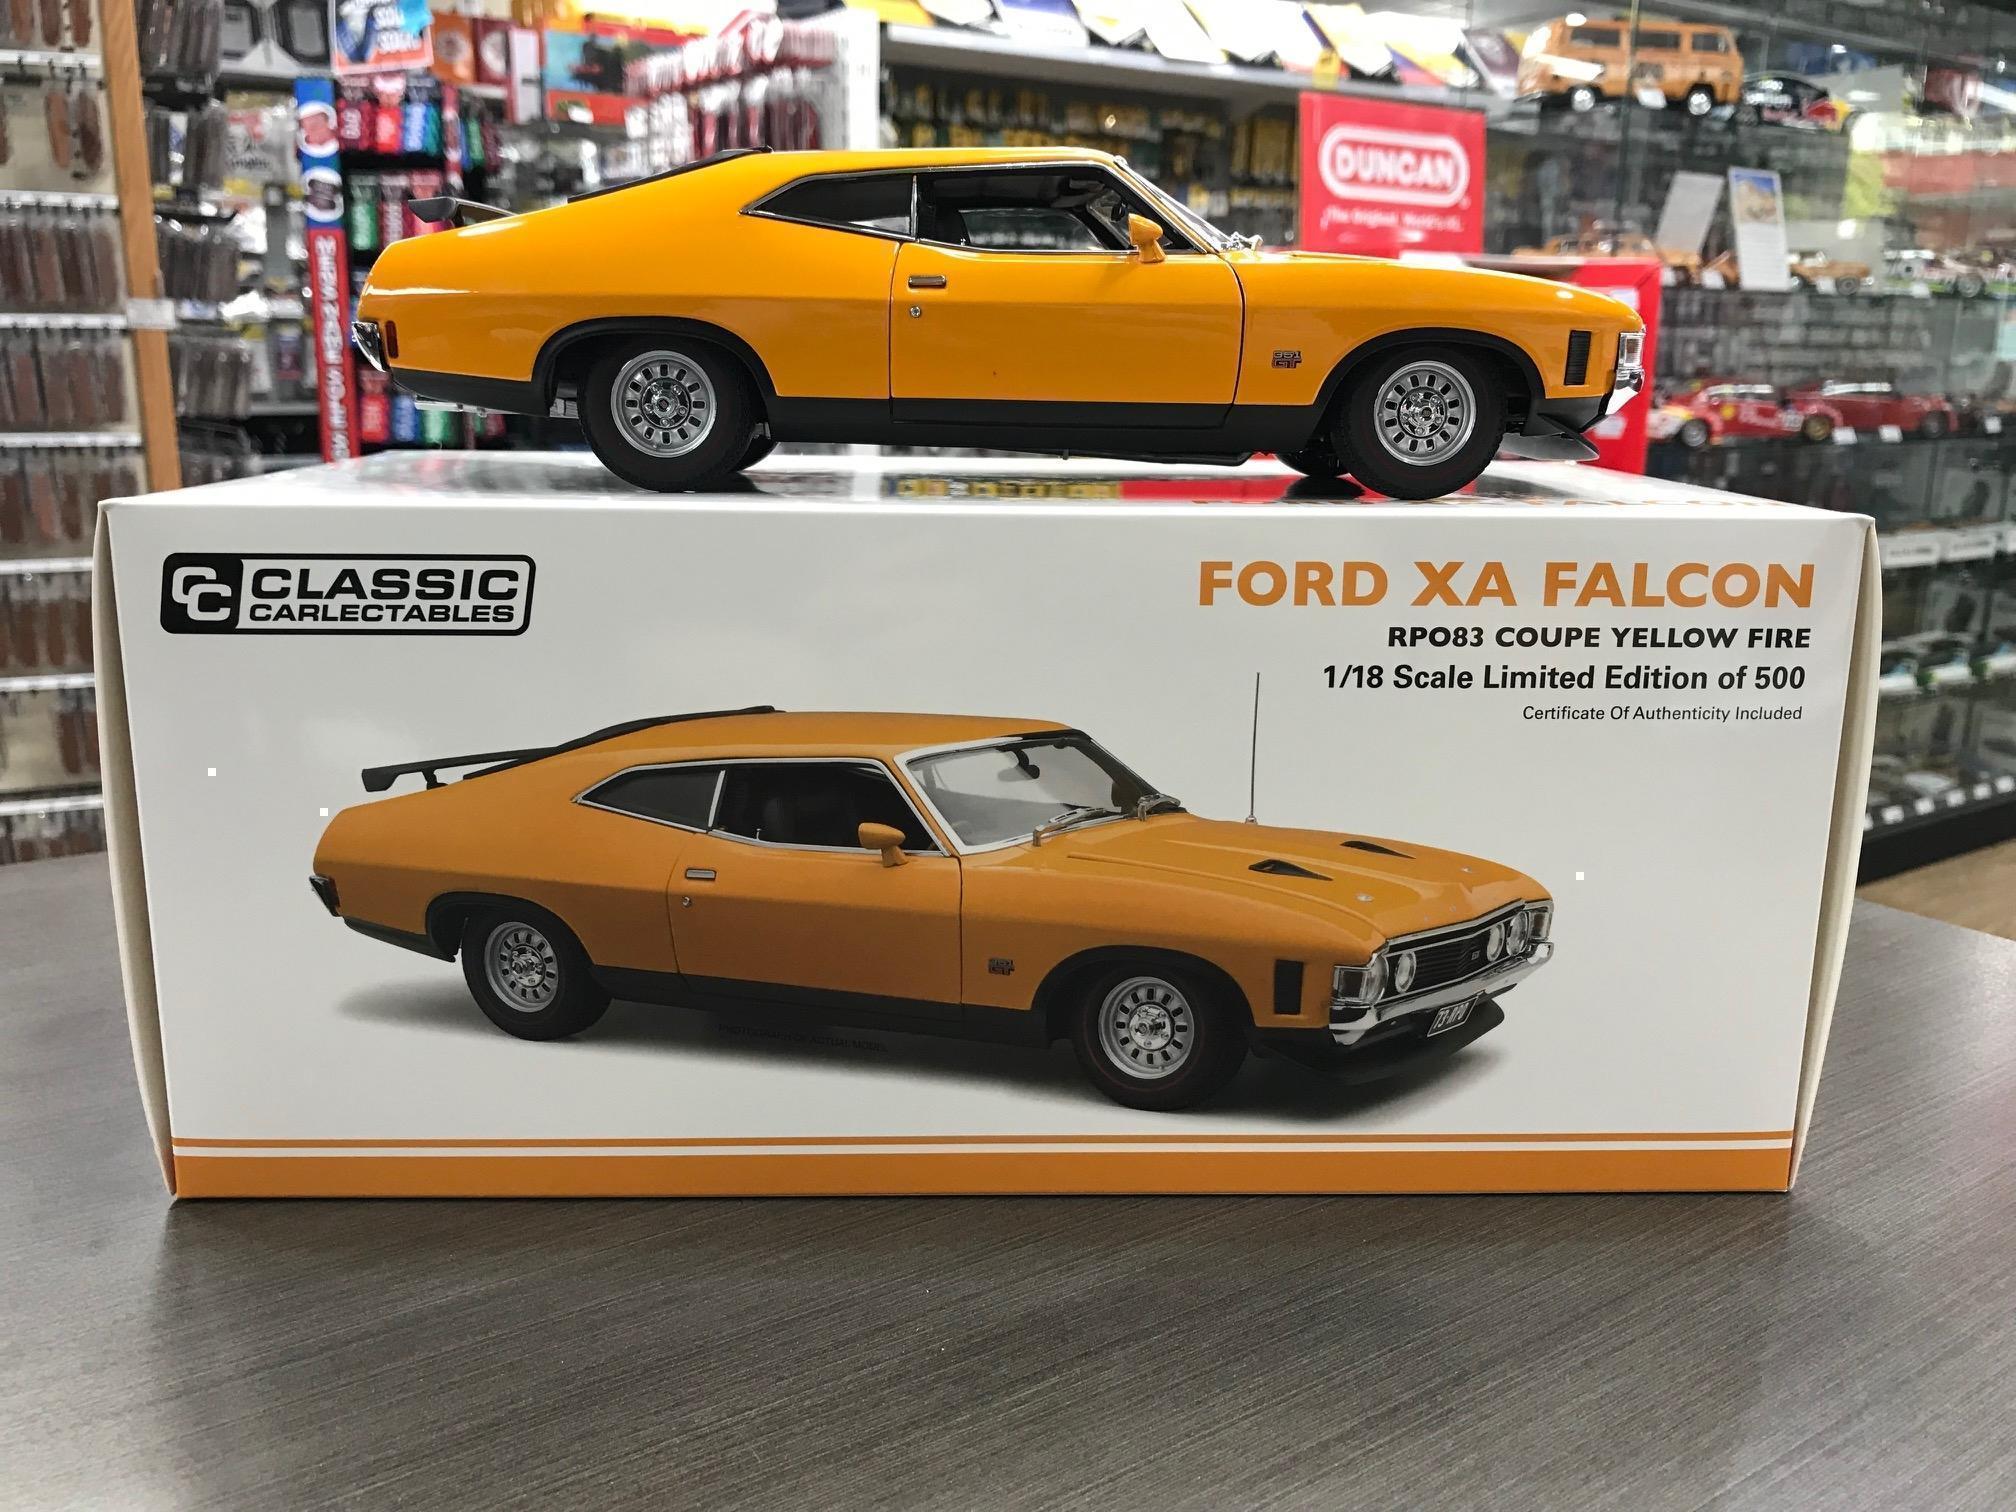 Ford XA Falcon GT RPO83 Coupe Yellow Fire 1:18 Scale Model Car